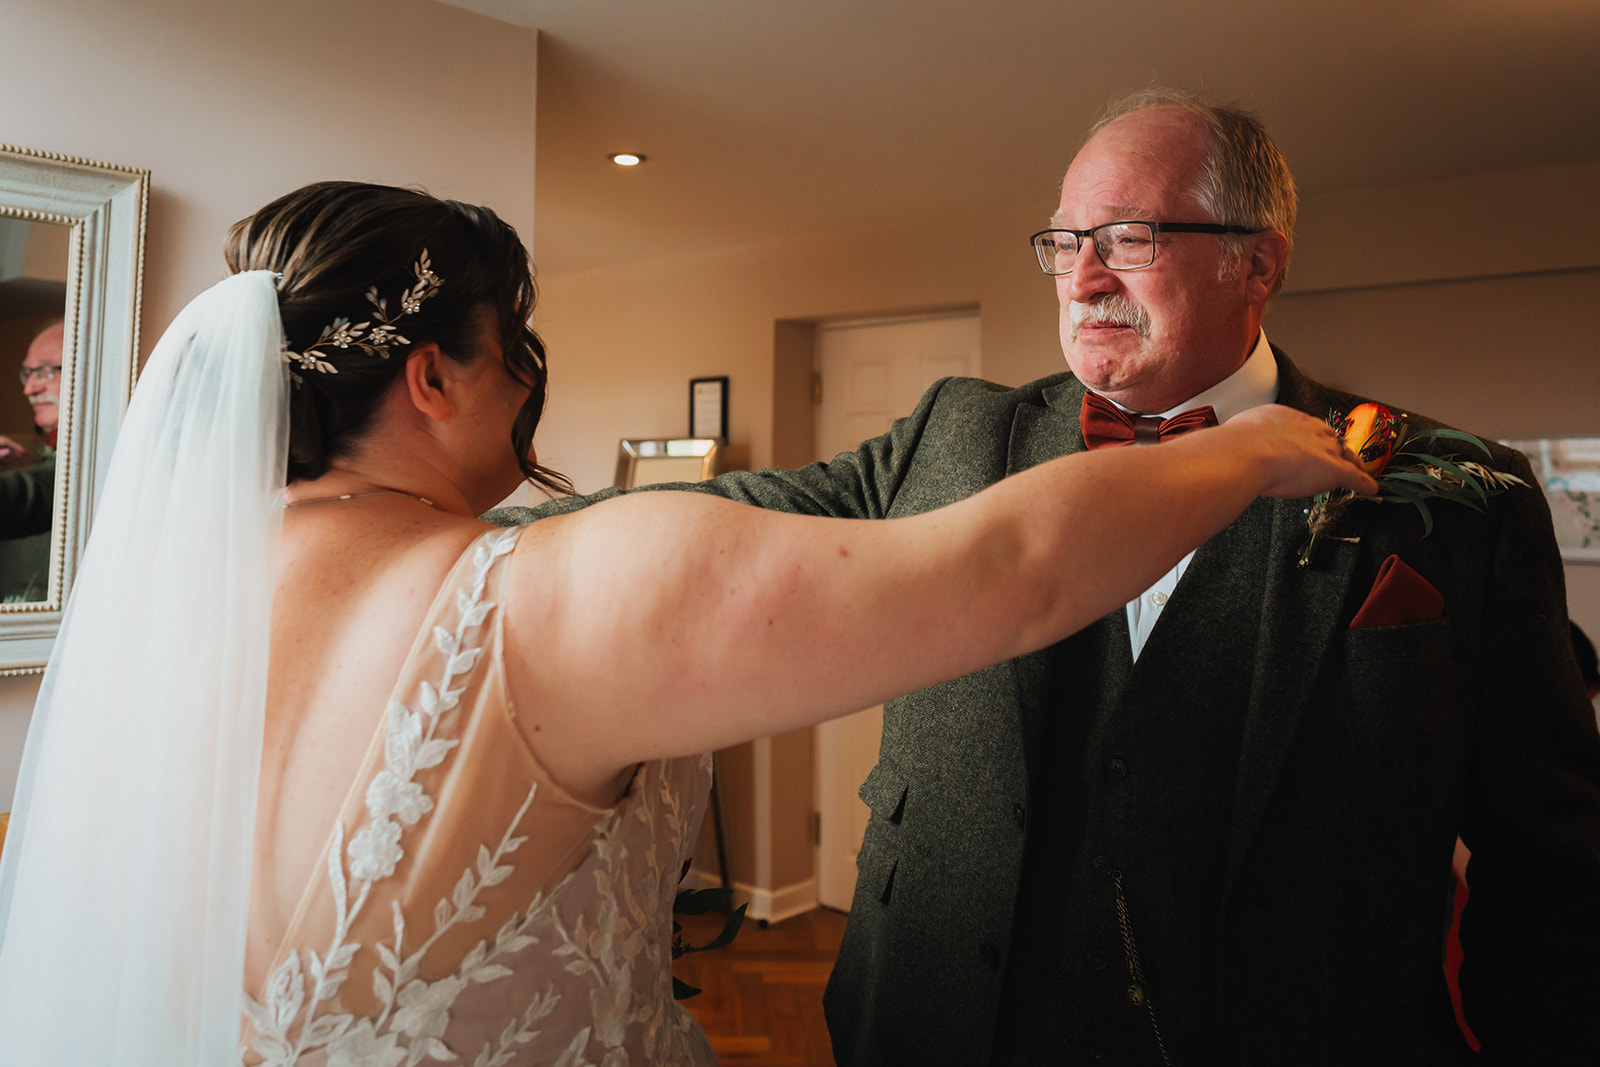 the father of the bride looking emotional as he sees his daughter in her wedding gown for the first time